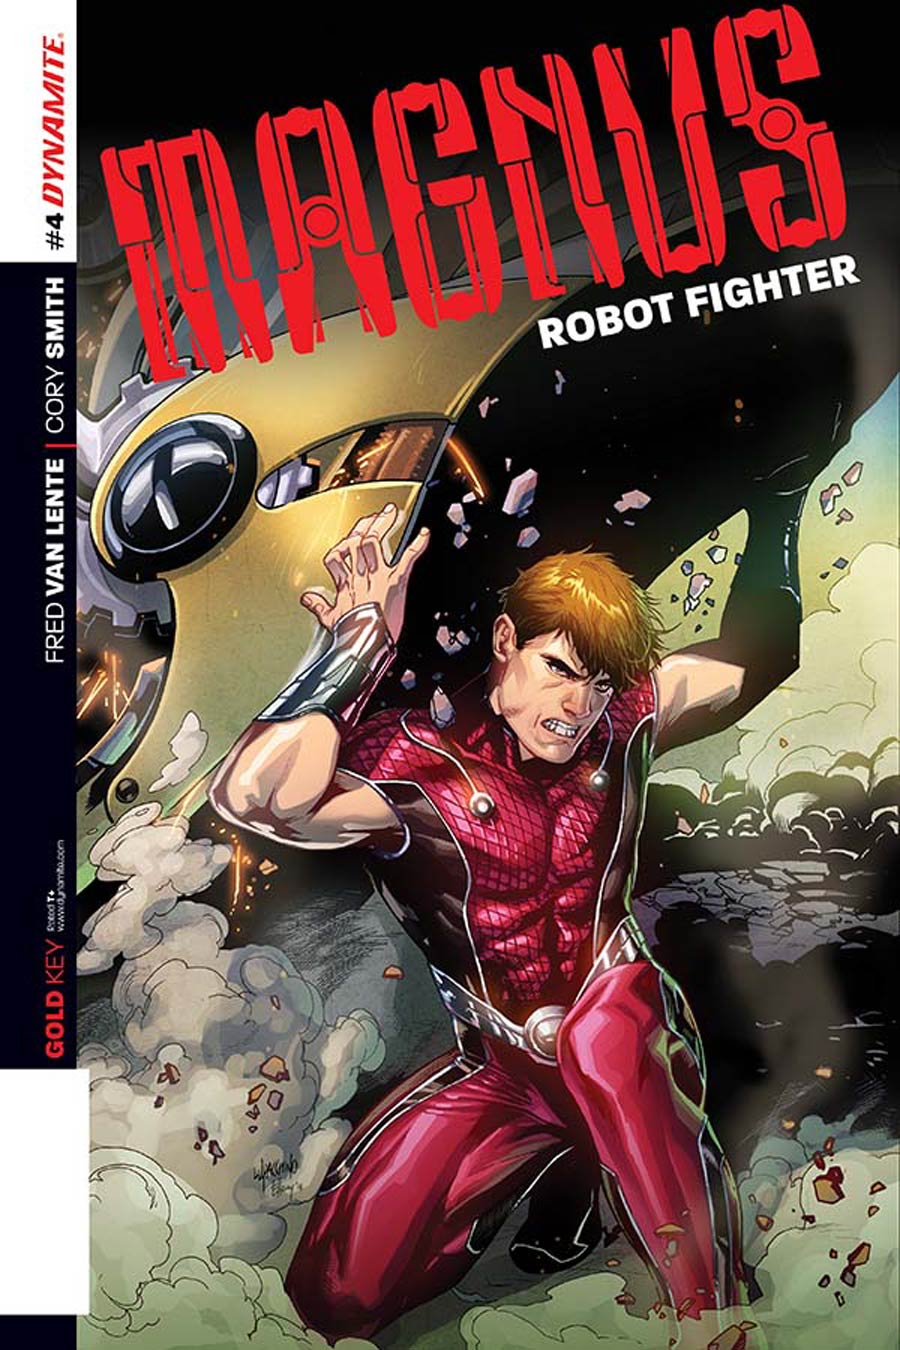 Magnus Robot Fighter Vol 4 #4 Cover C Incentive Emanuela Lupacchino Variant Cover